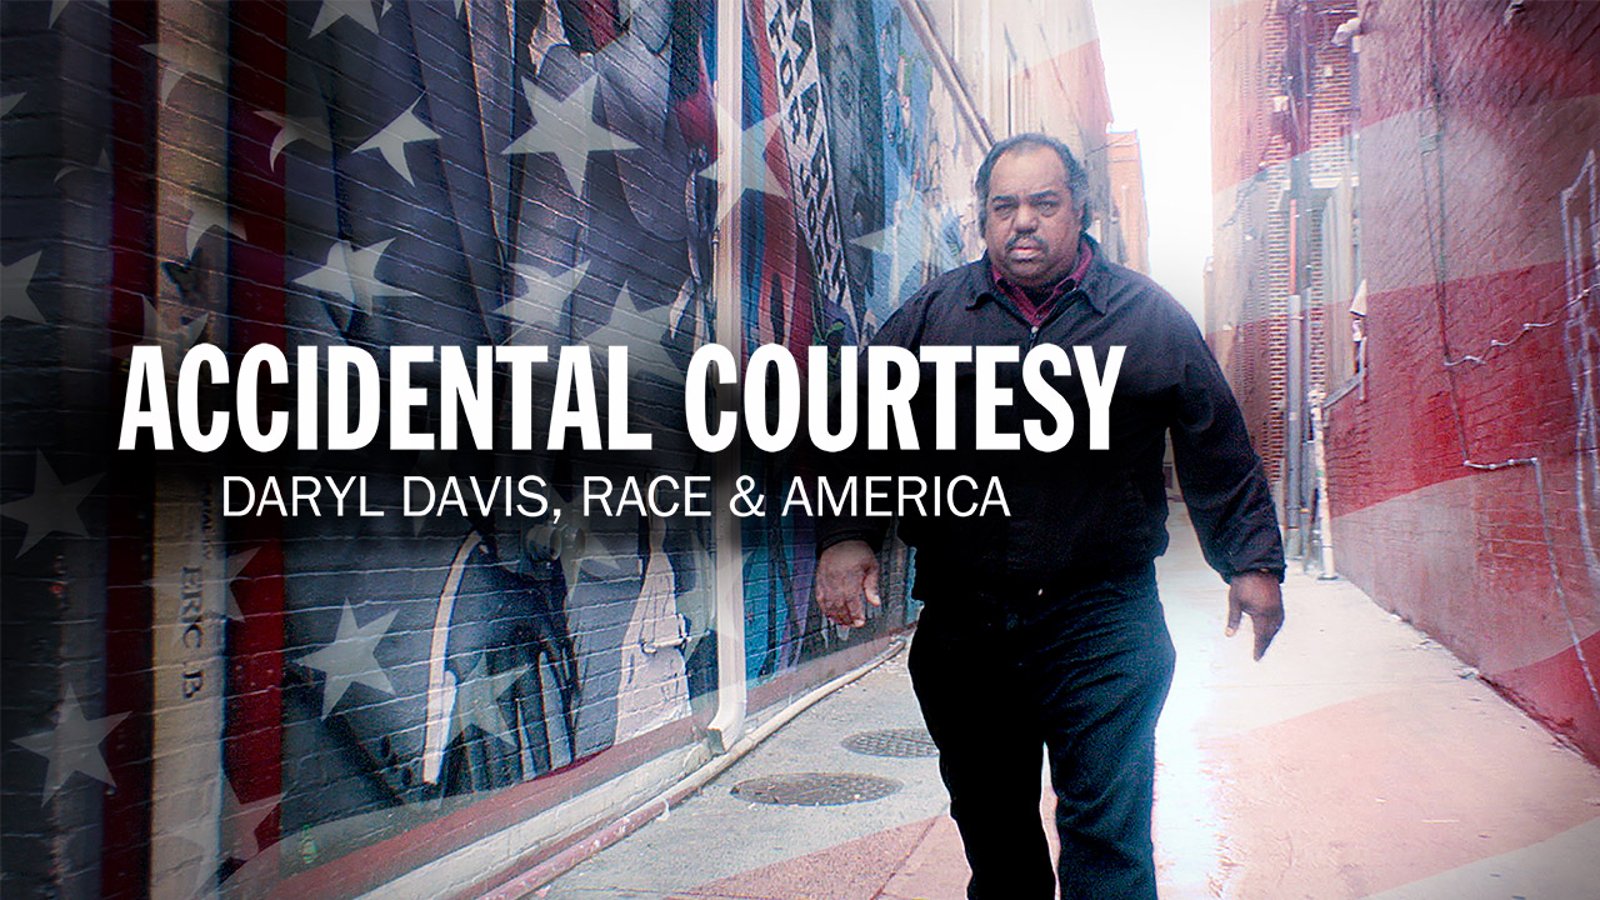 Accidental Courtesy - Musician Daryl Davis Meets and Befriends Members of the Ku Klux Klan